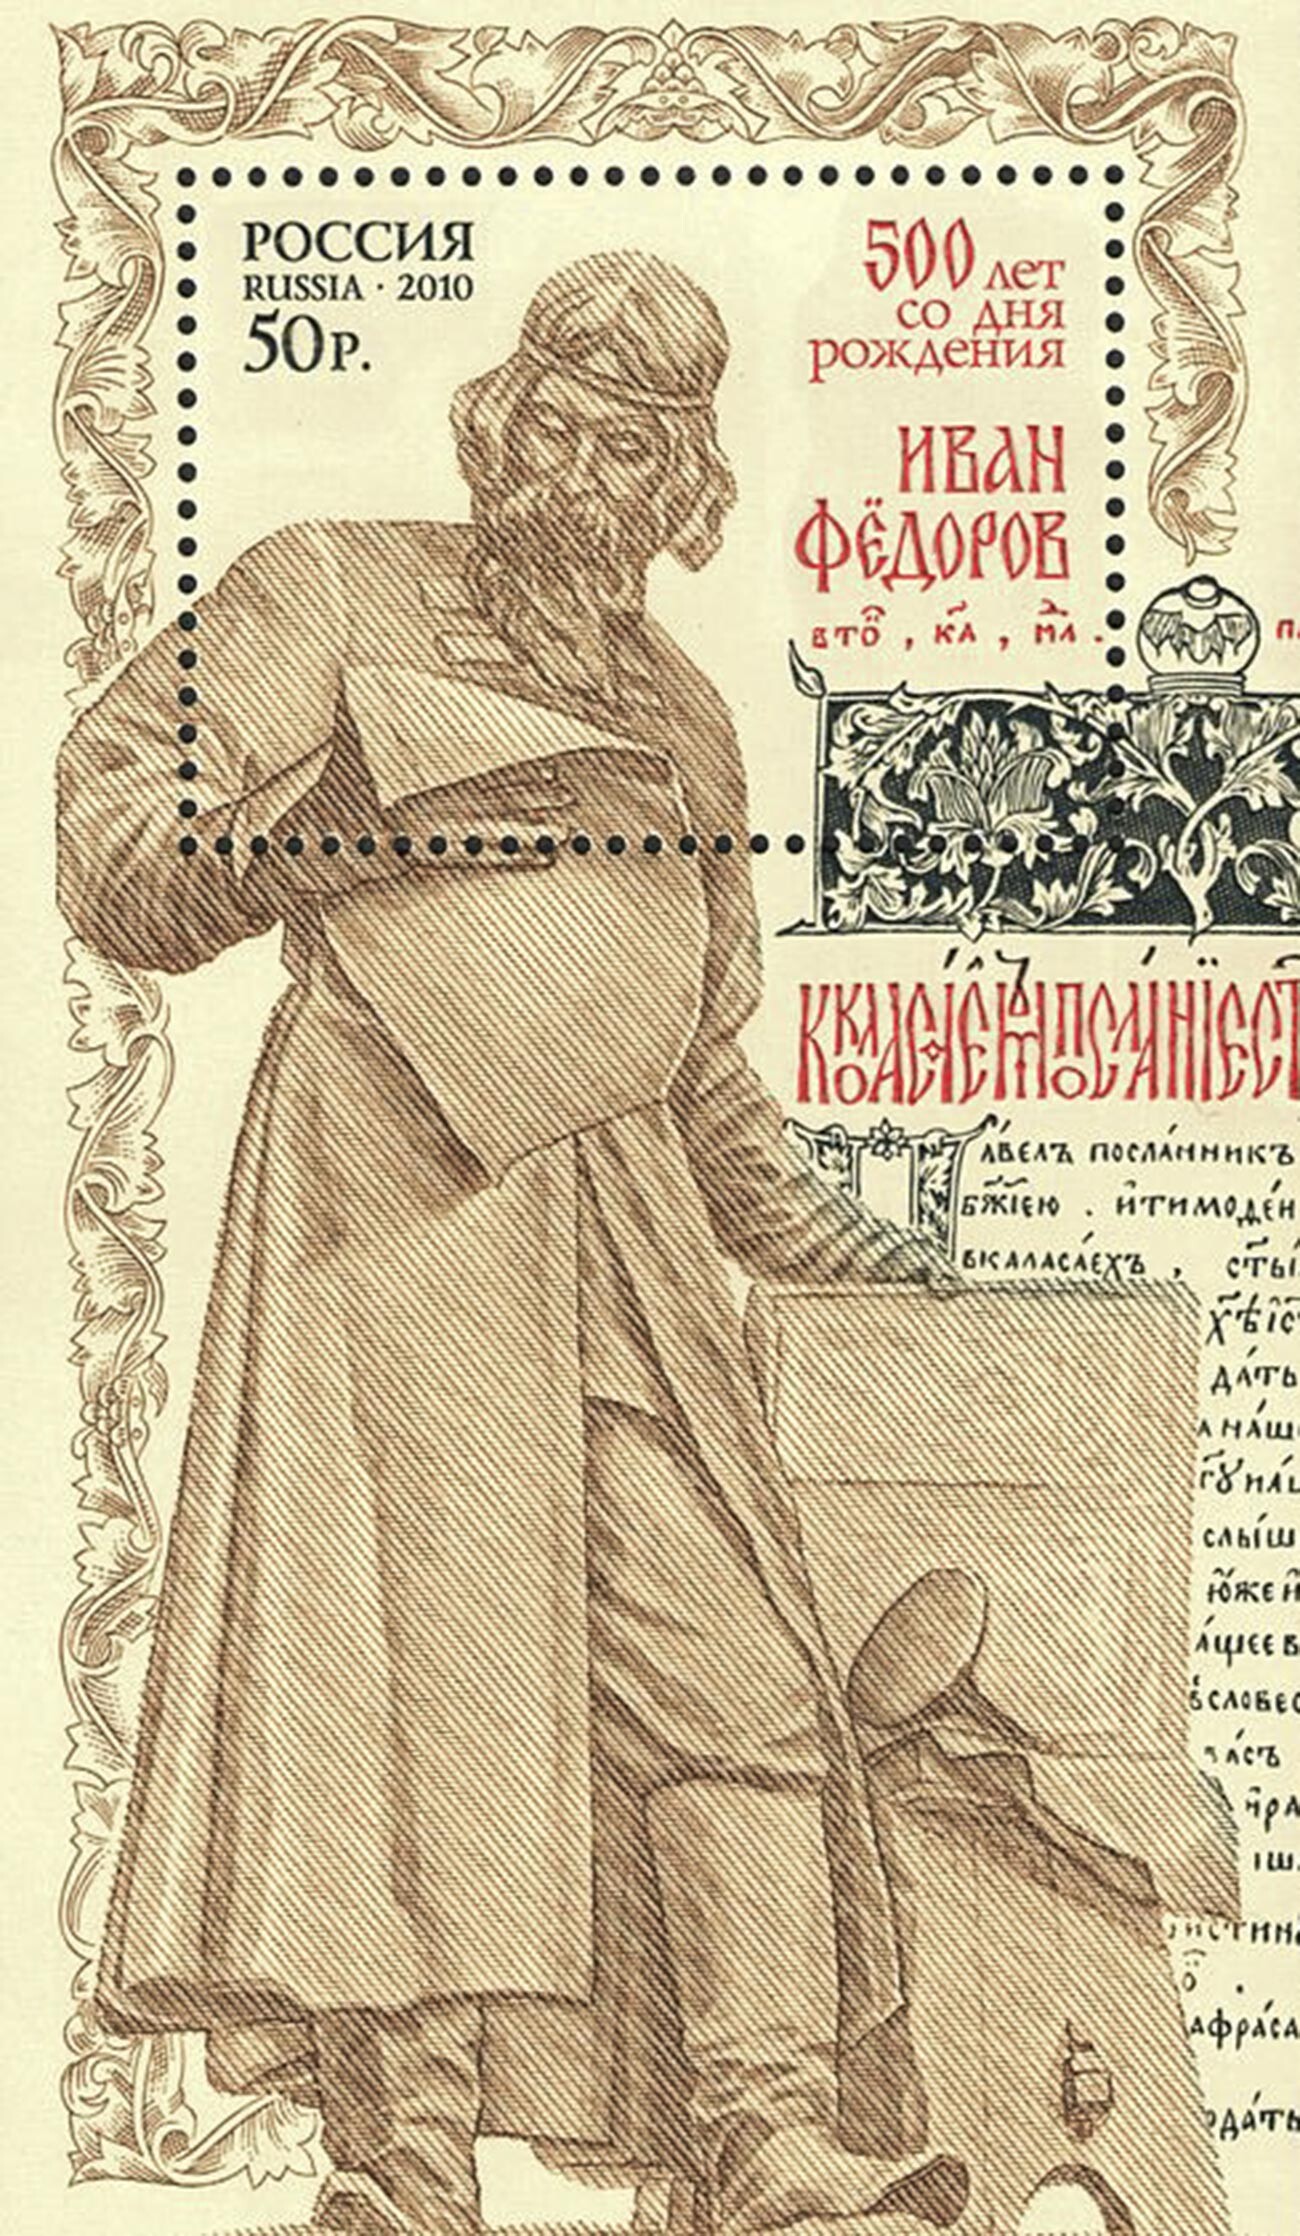 A postcard marking the 500th anniversary of the alleged birth of Ivan Fedorov, 2010